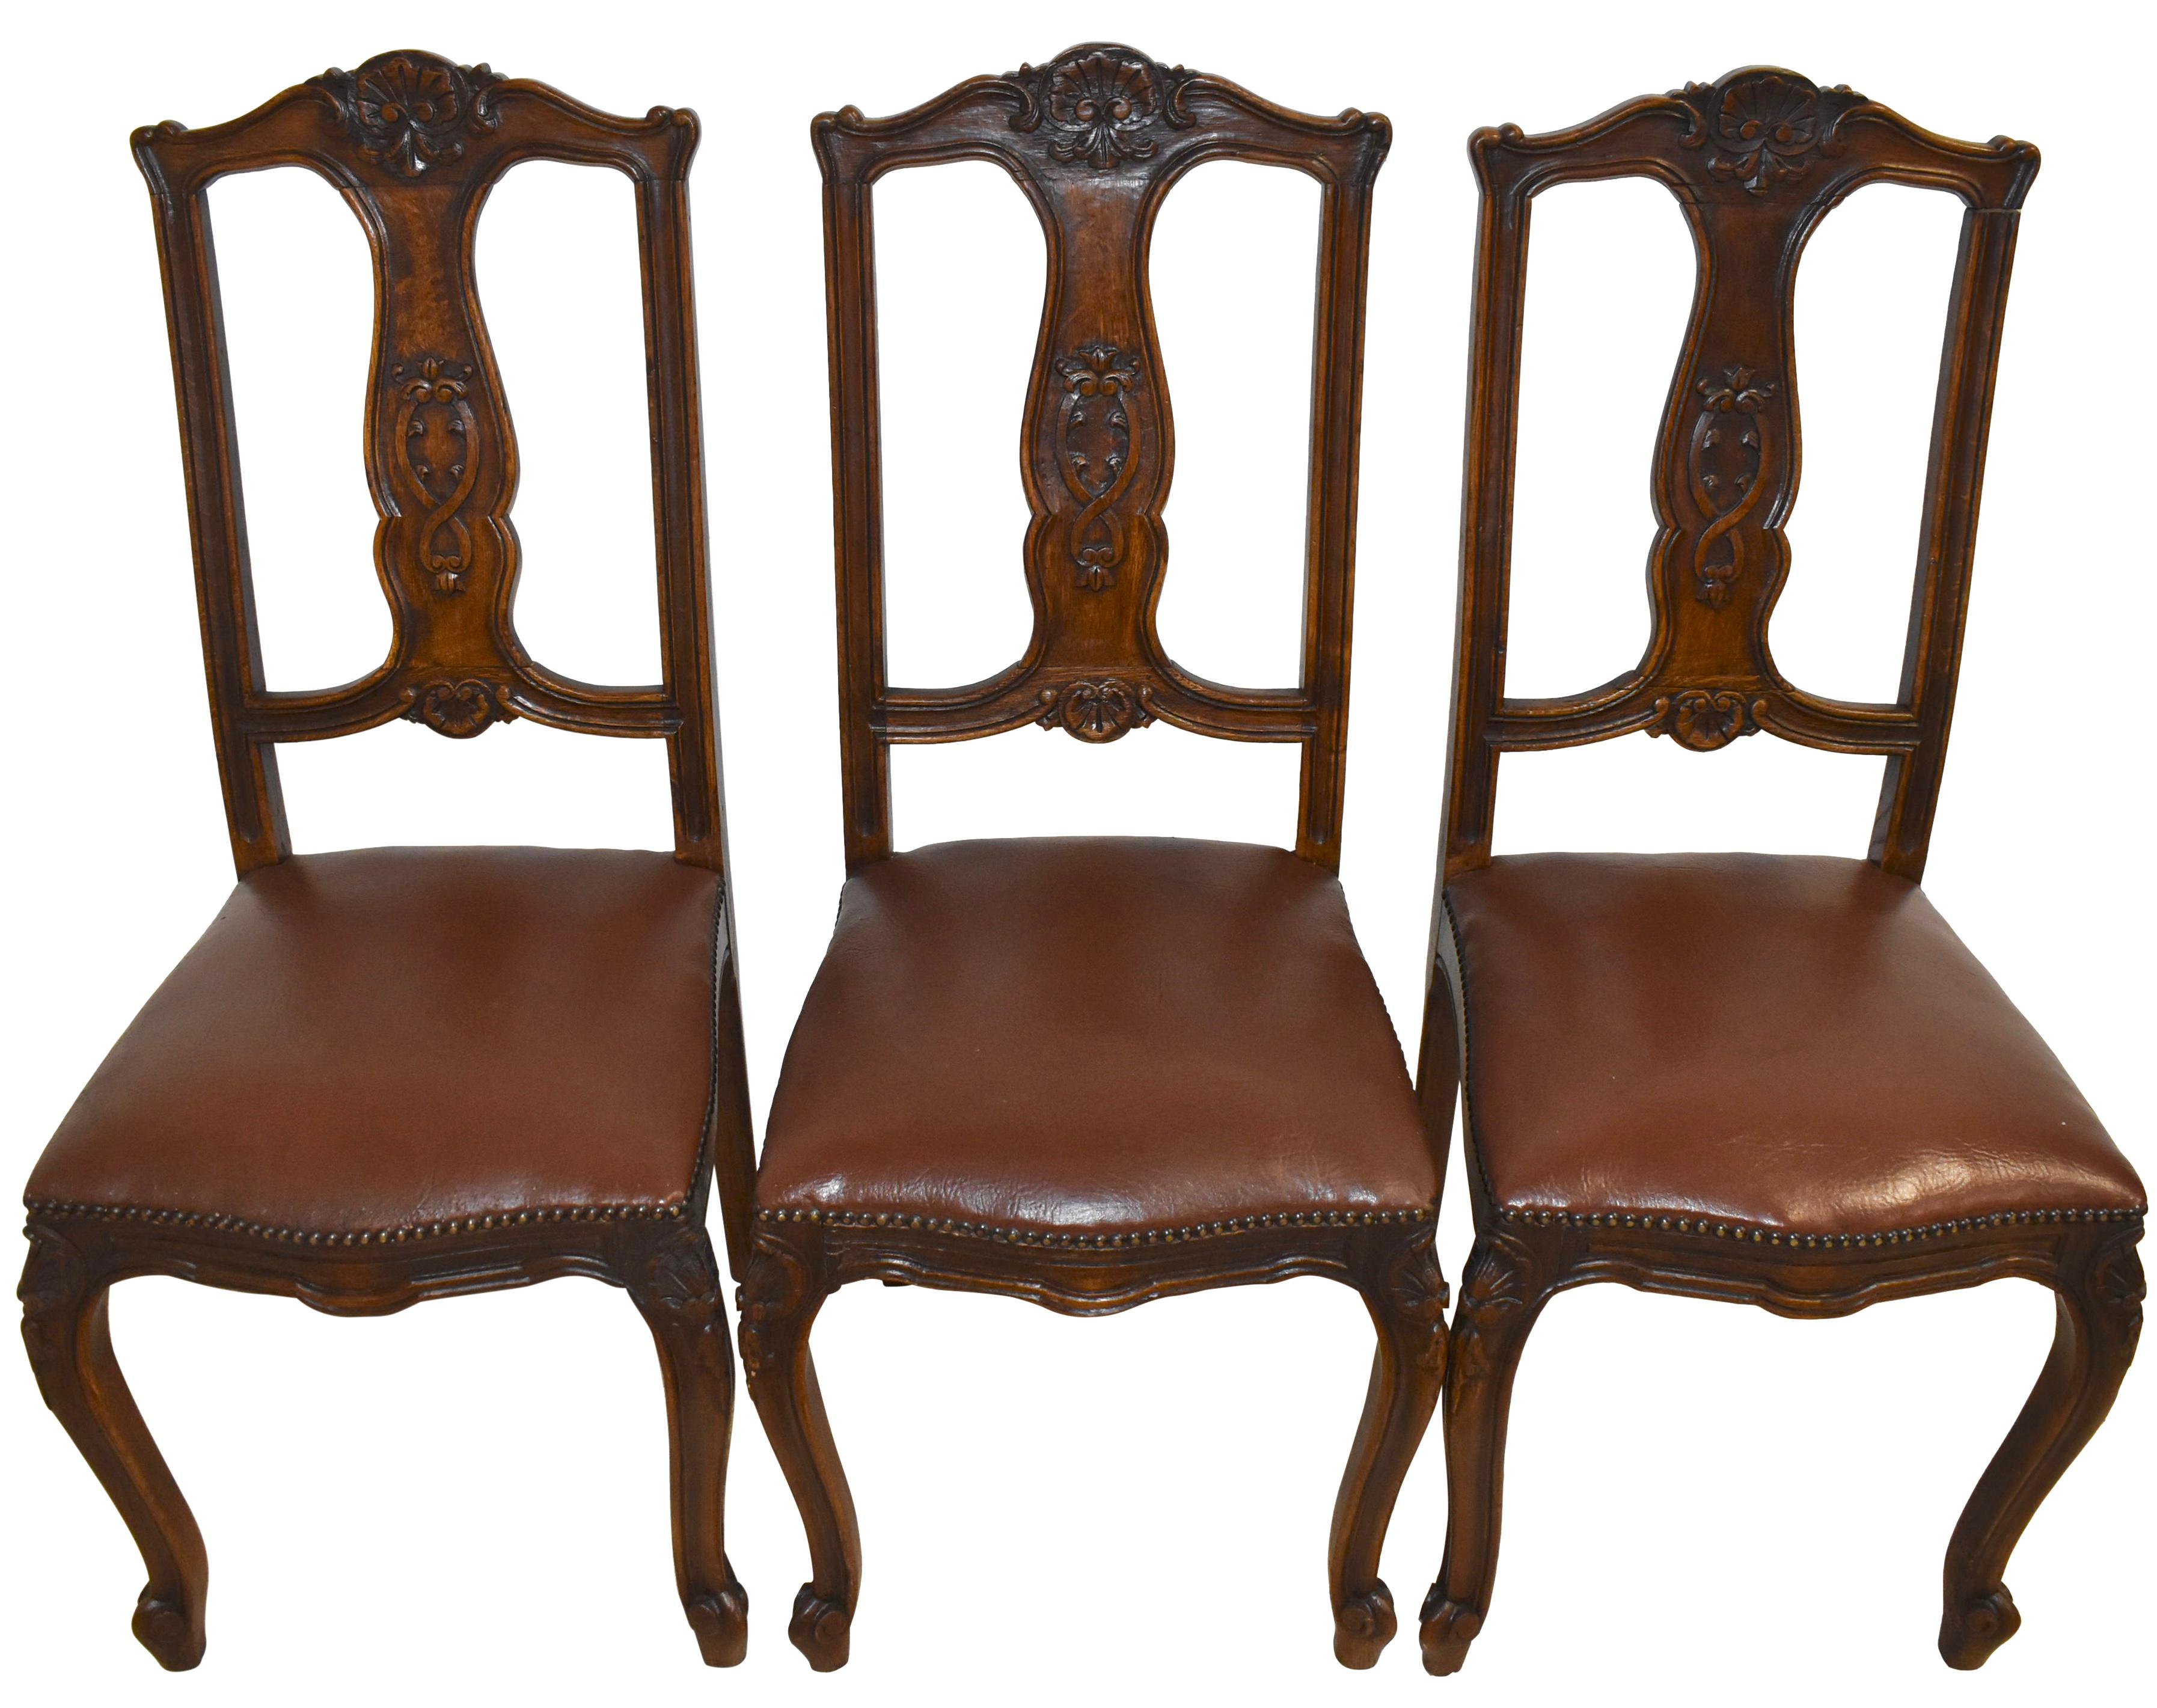 Carved Oak Parquet Draw-Leaf Dining Table and Upholstered Chairs, Seven Piece Set For Sale